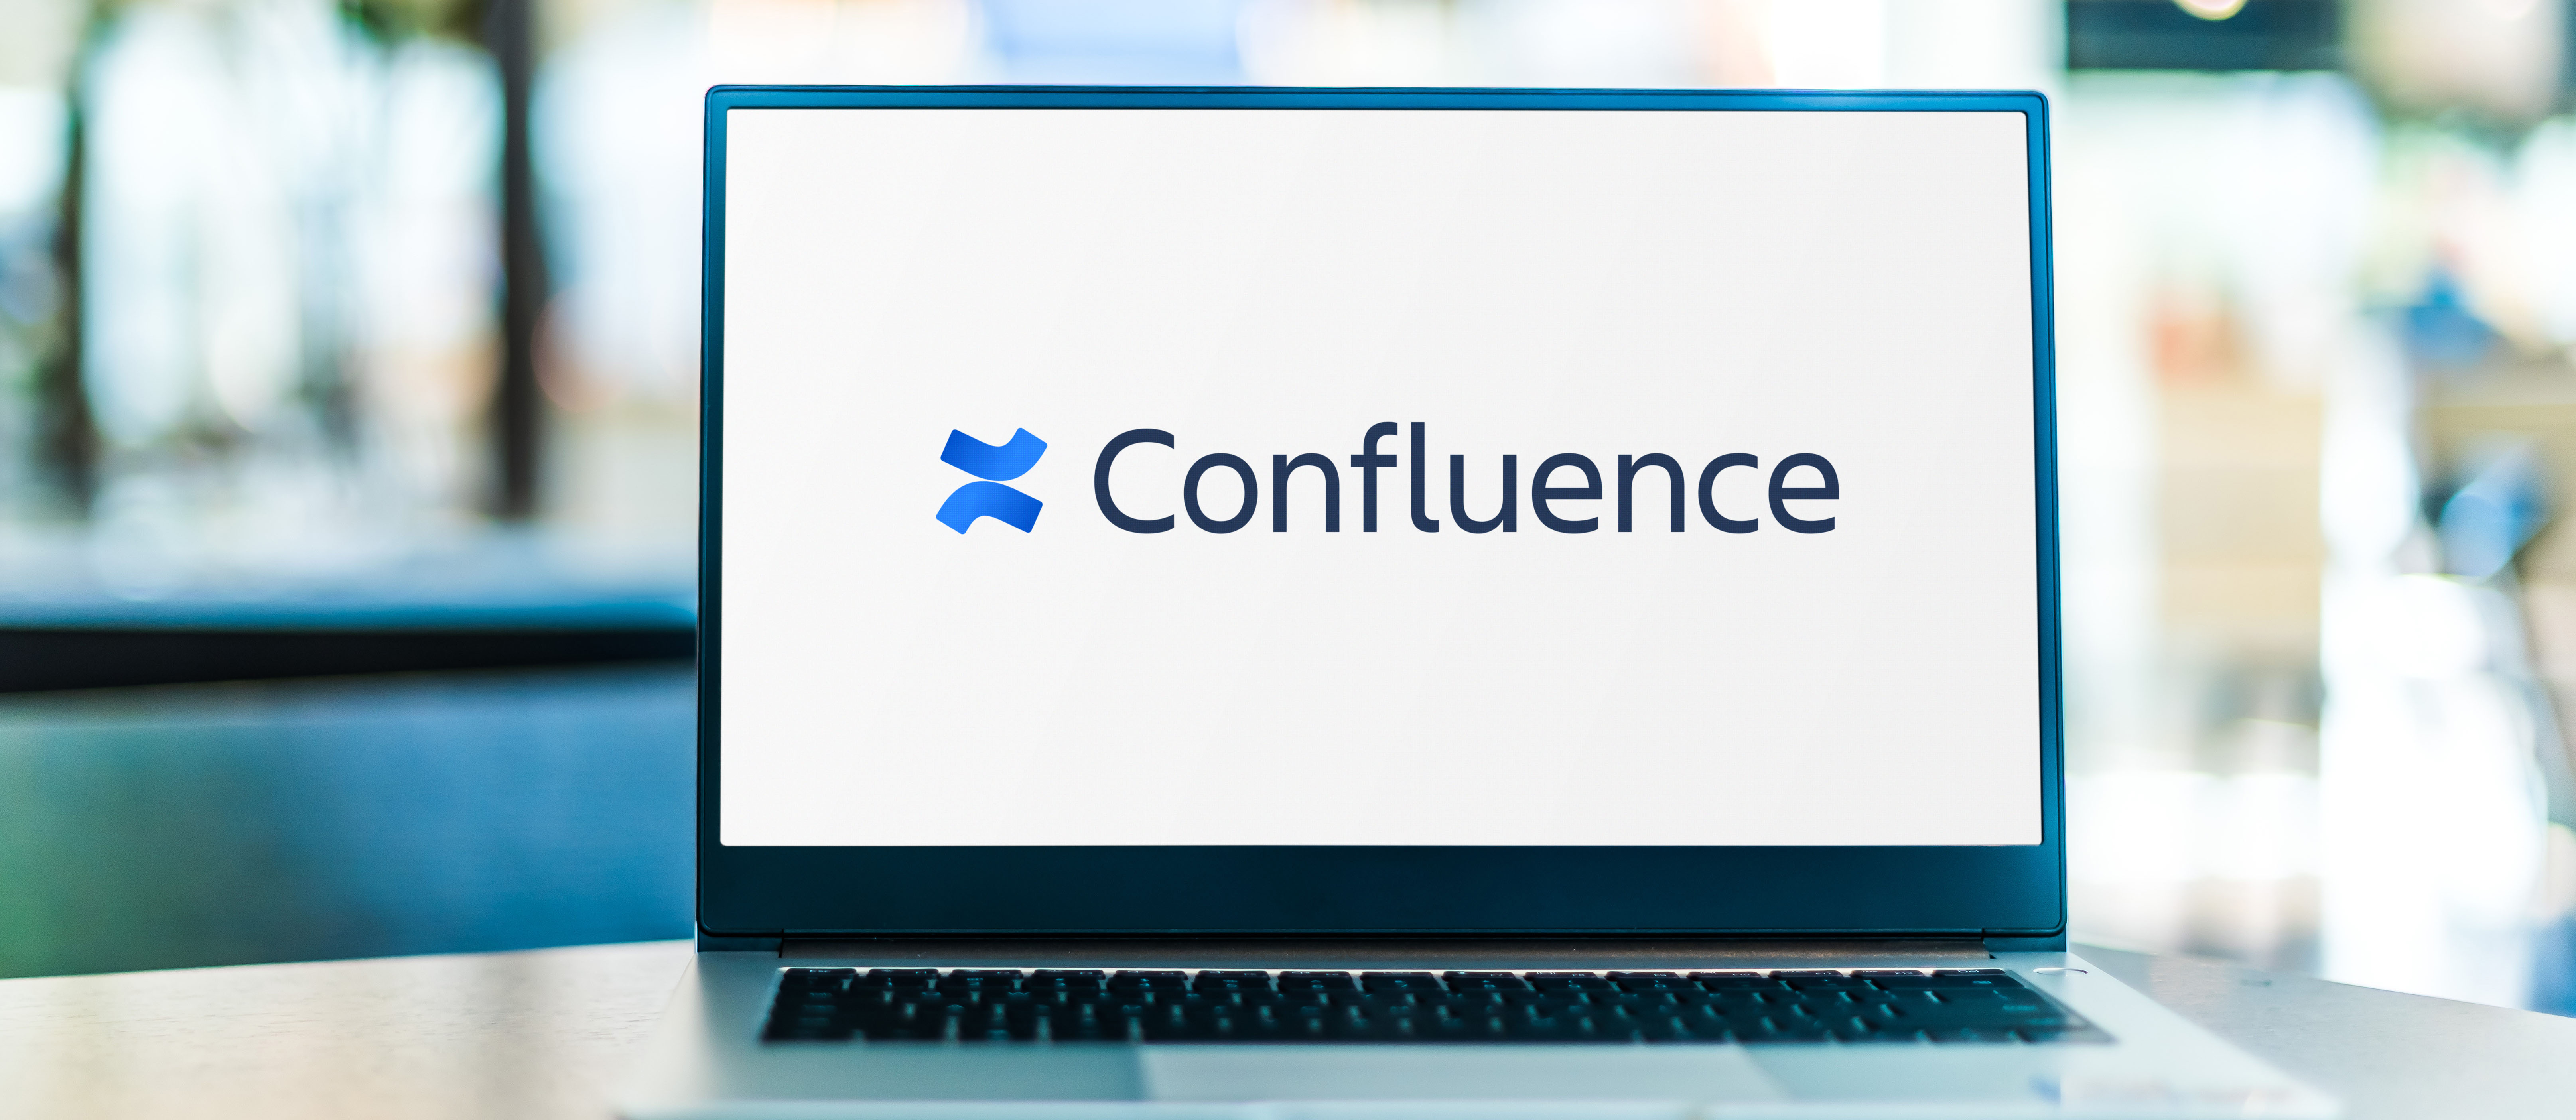 image of a computer with the Confluence logo on the screen